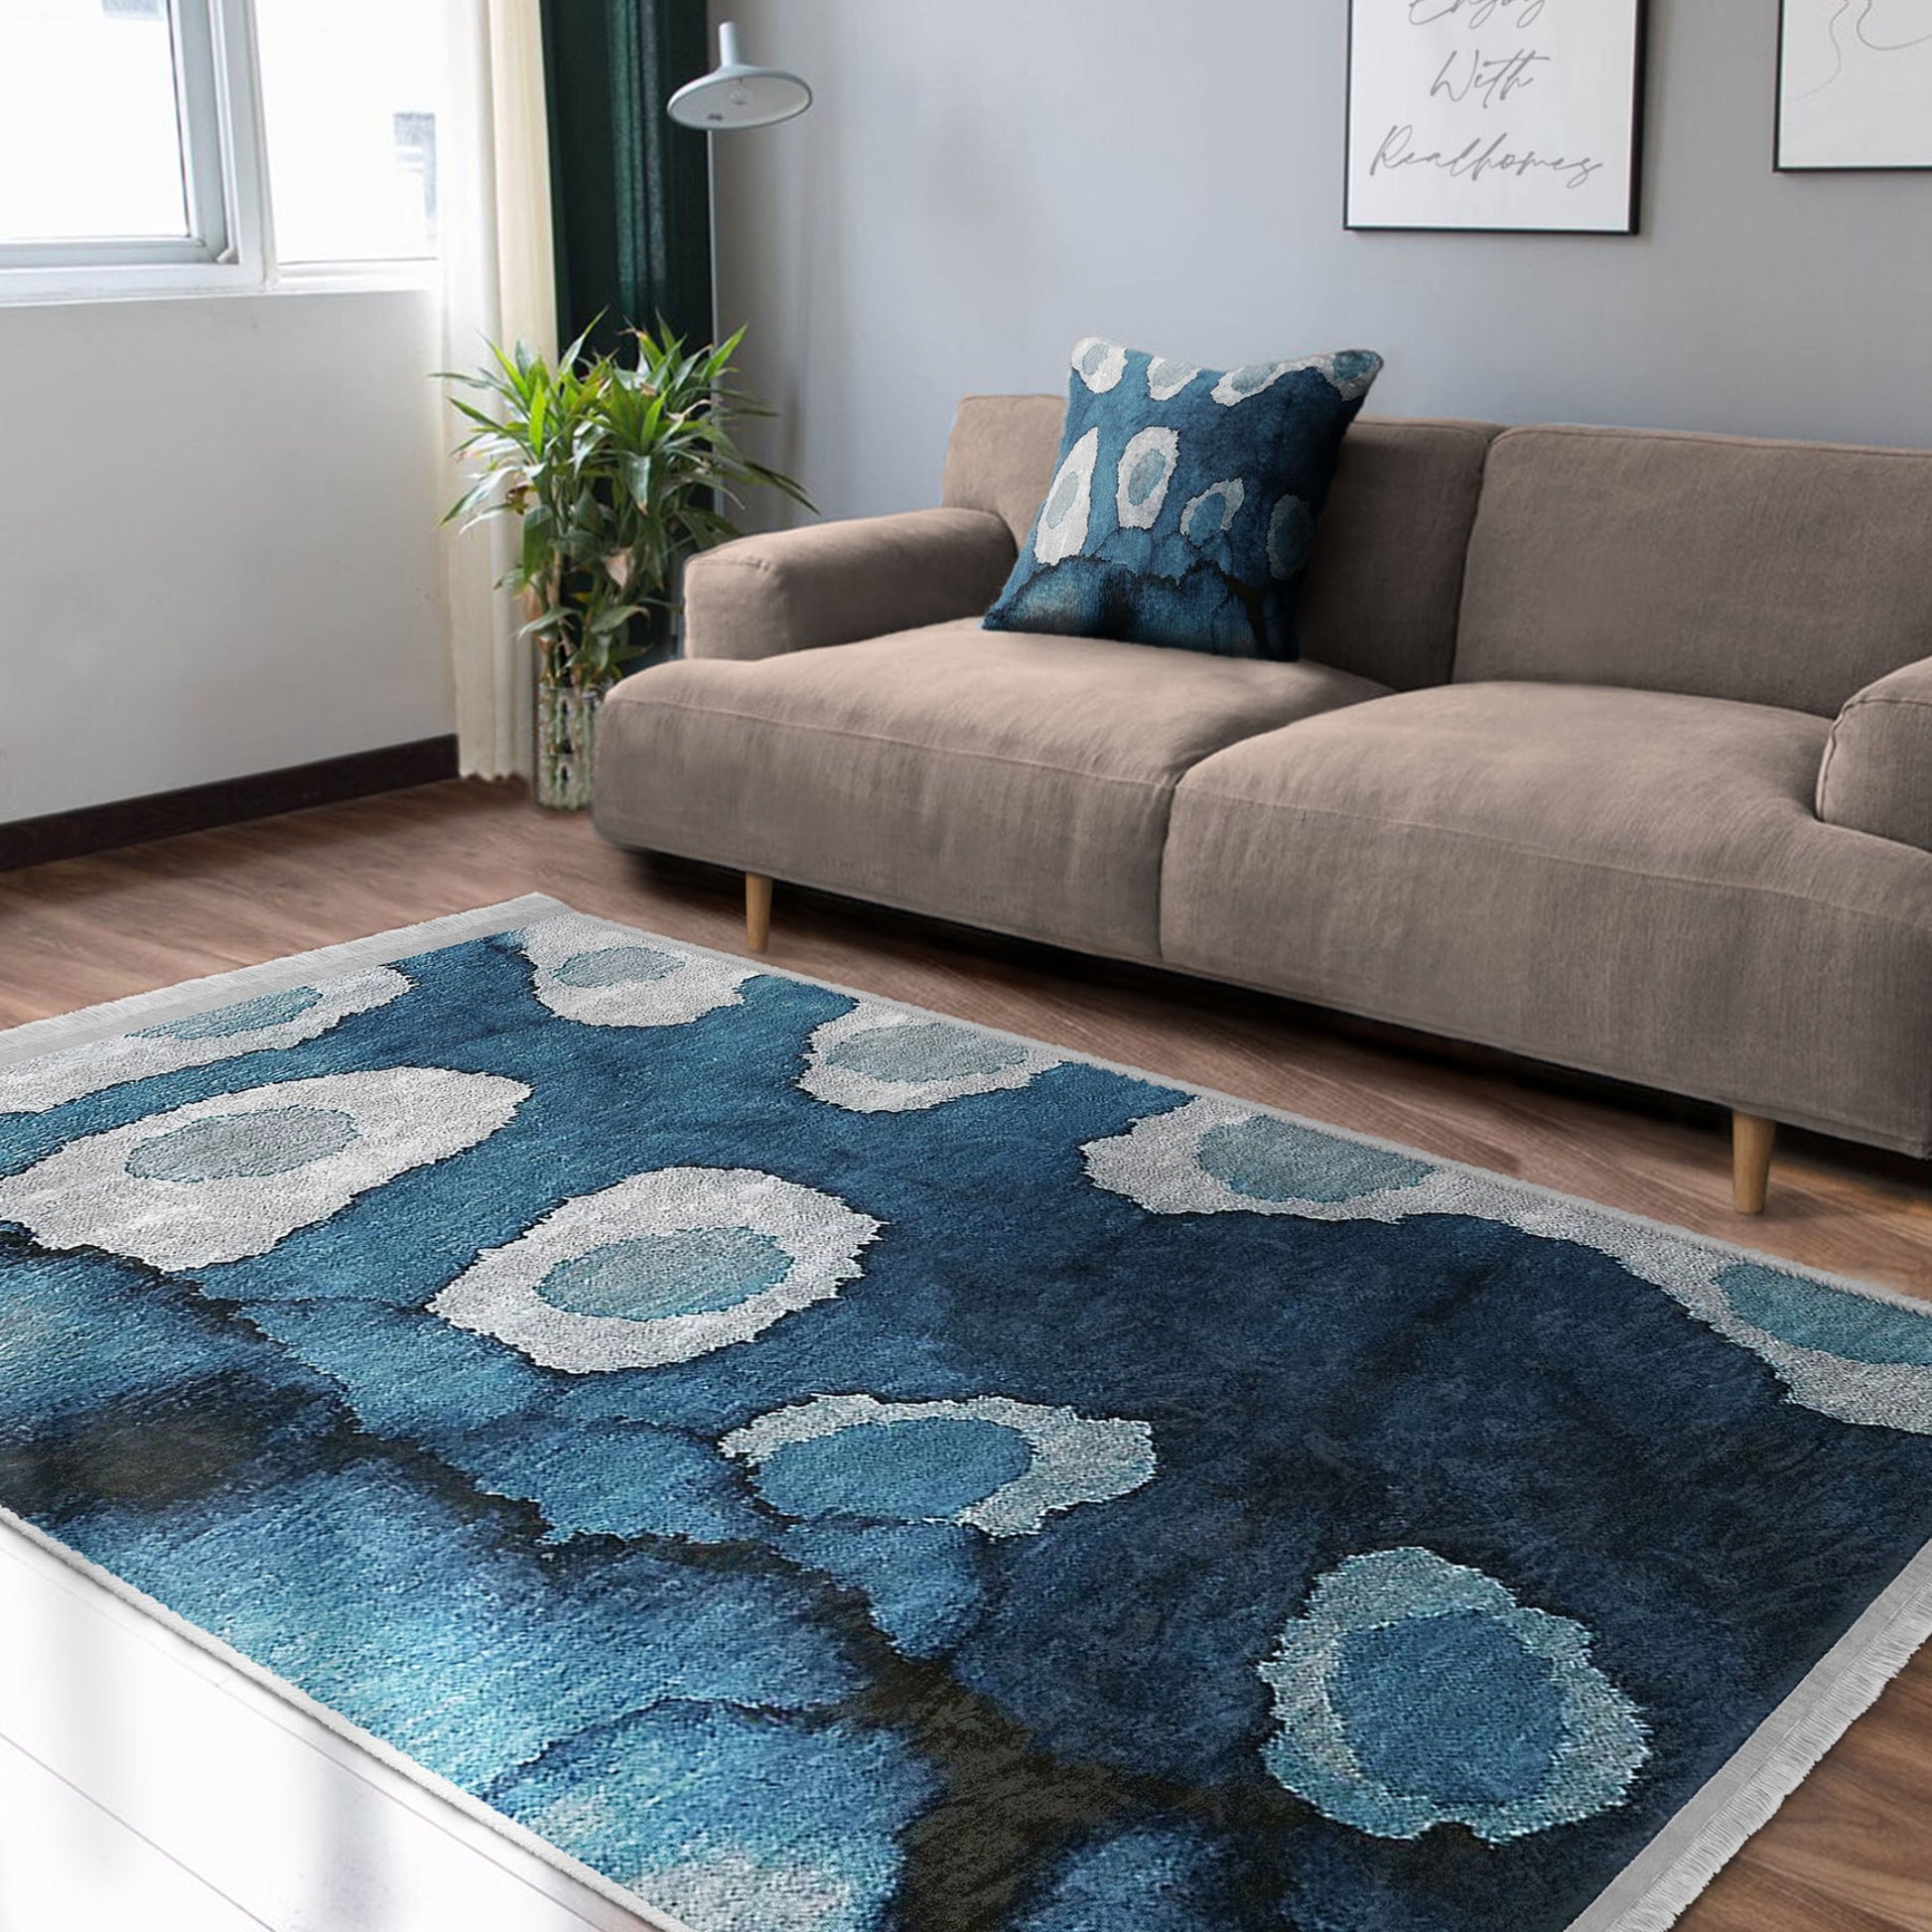 Blue Ocean Patterned Area Rug for a Stylish and Relaxing Interior